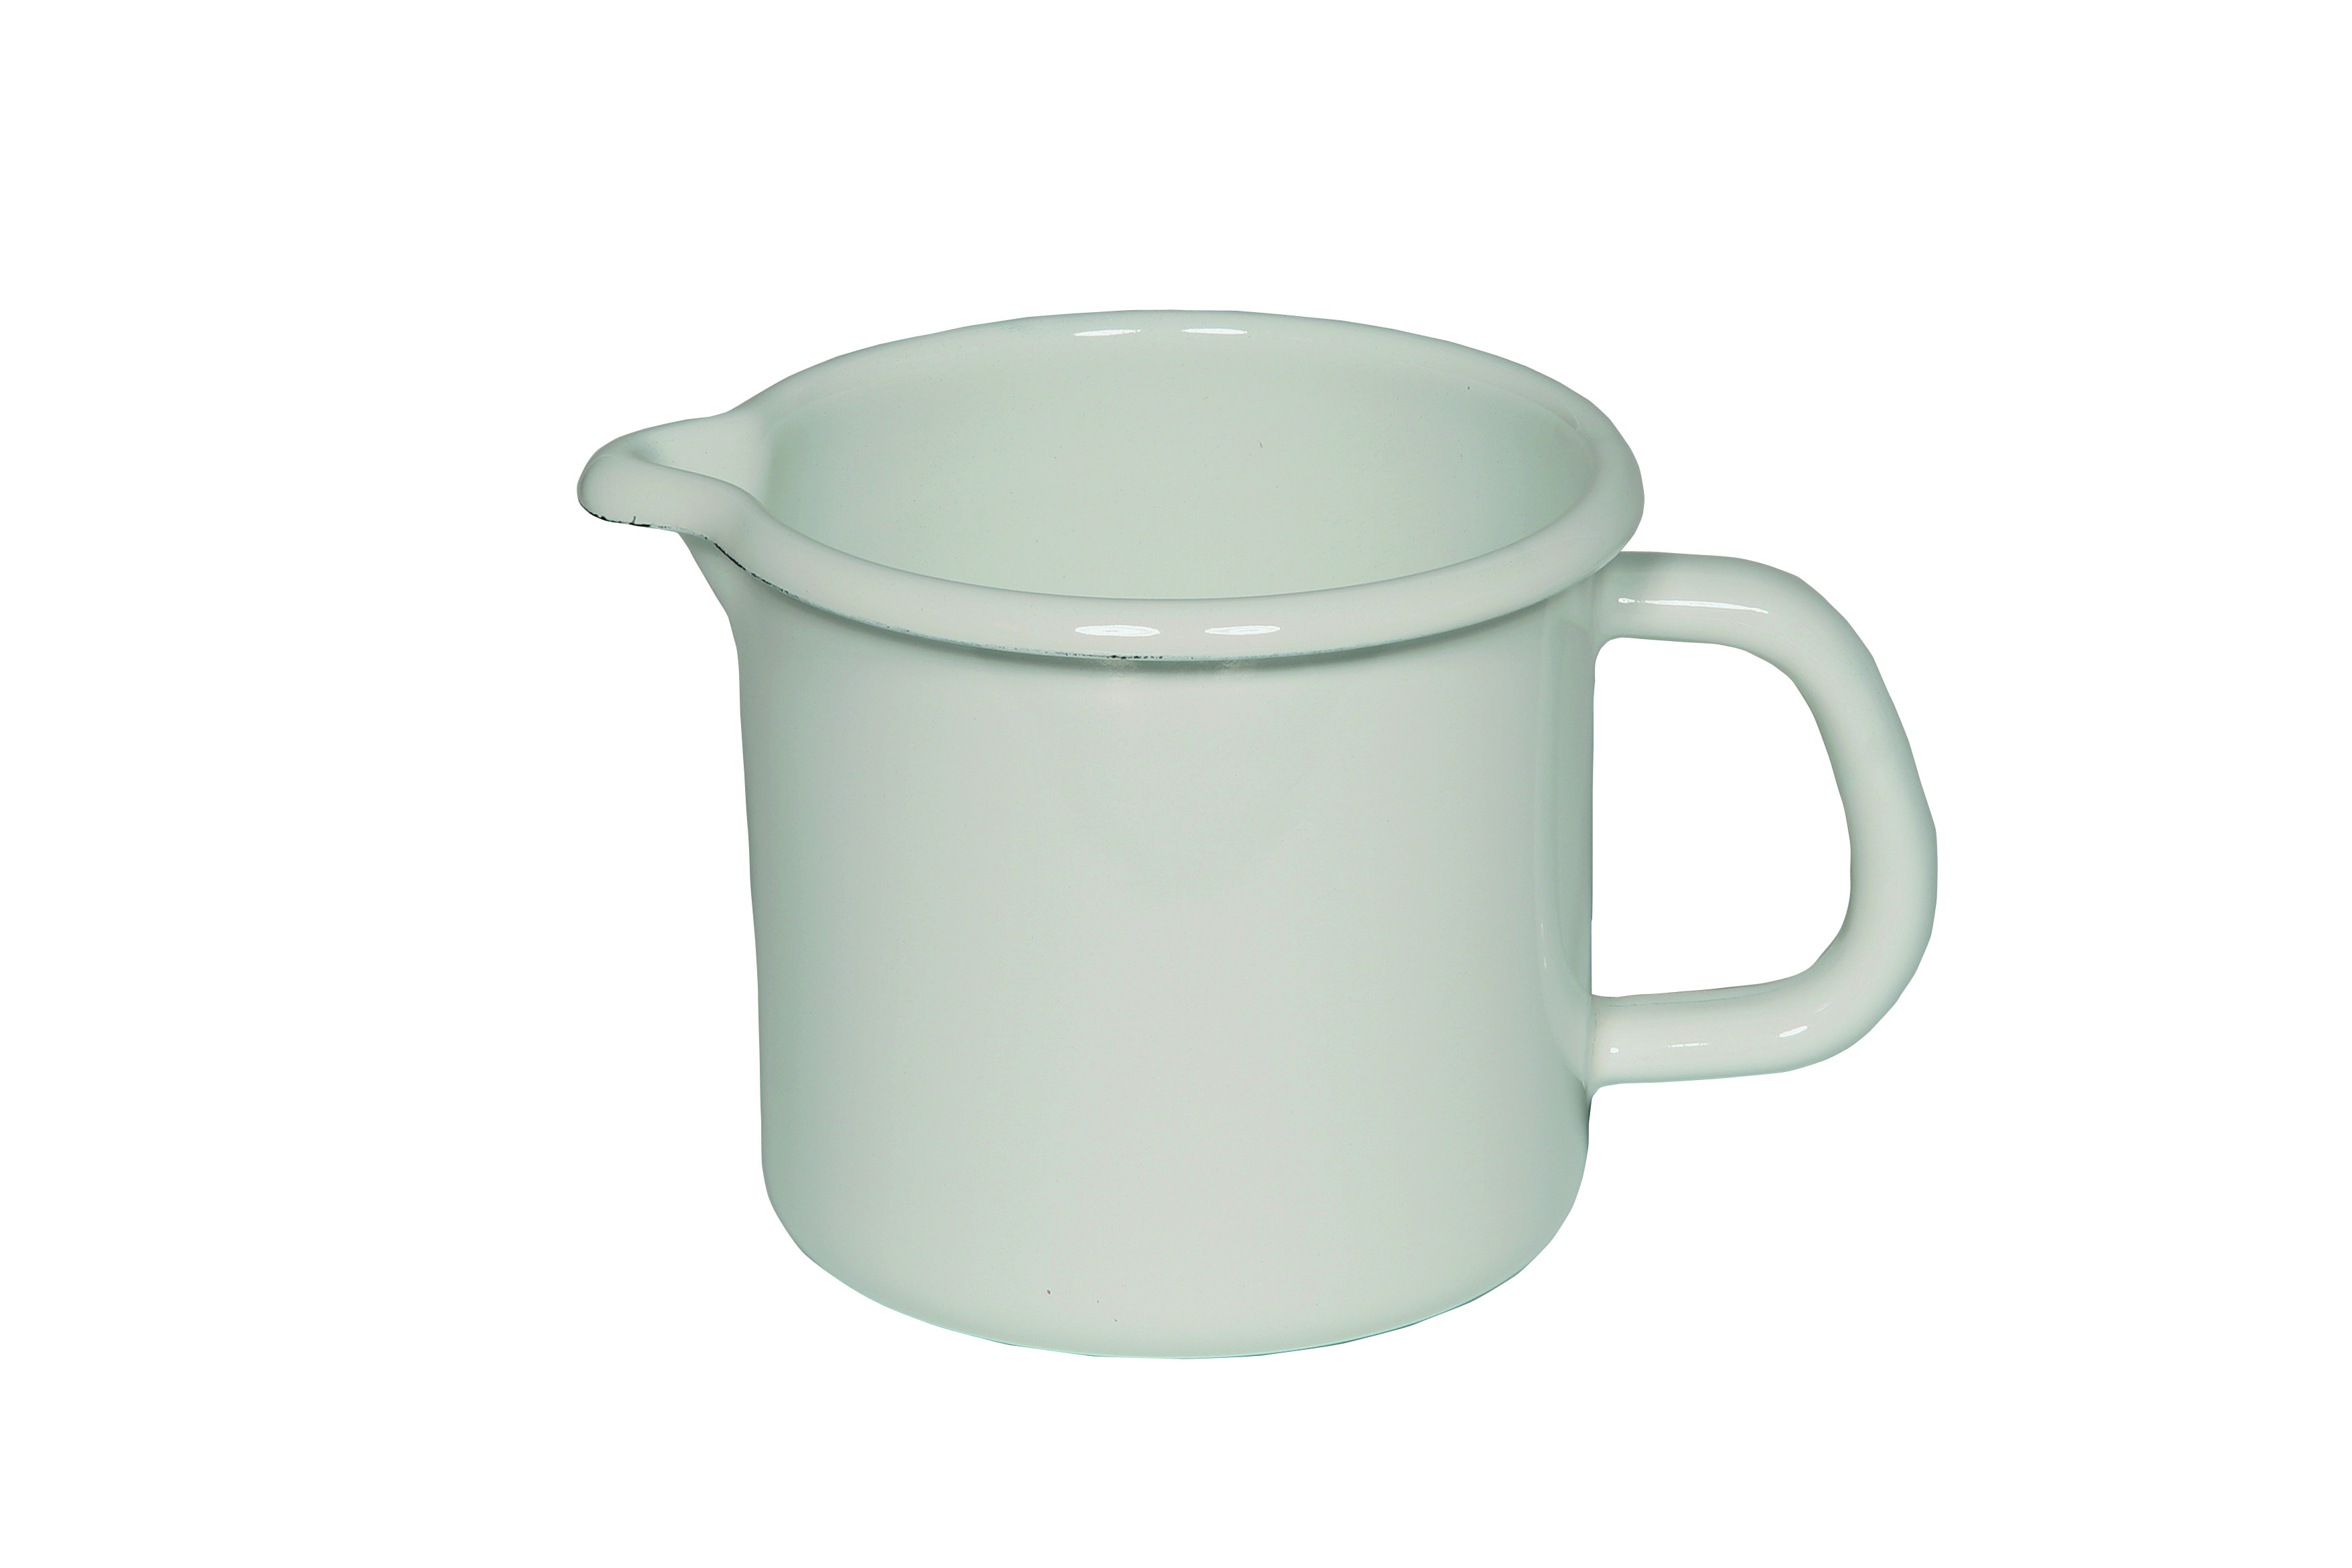 Riess Classic Weiß Schnabeltopf 14 cm / 1,7 Ltr / aus Emaille